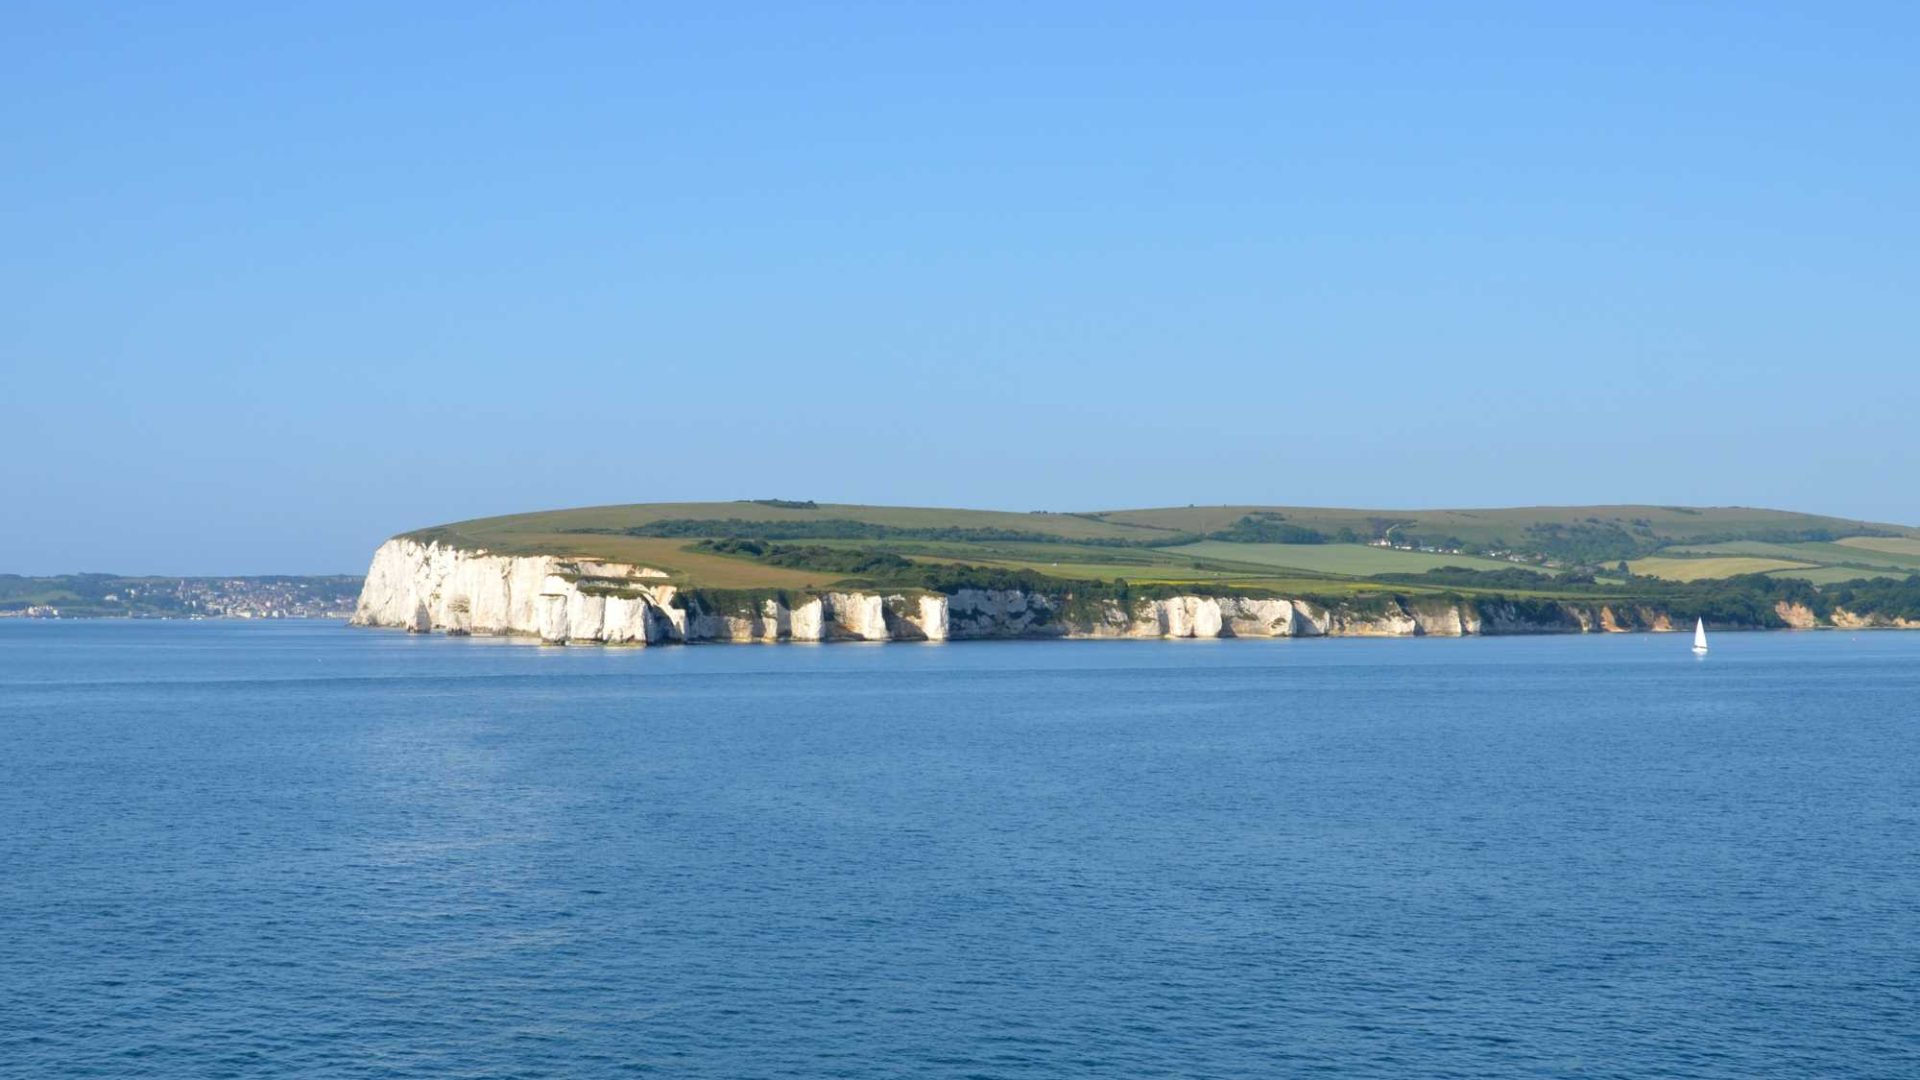 Landscape photo of the Isle of Purbeck taken from the sea